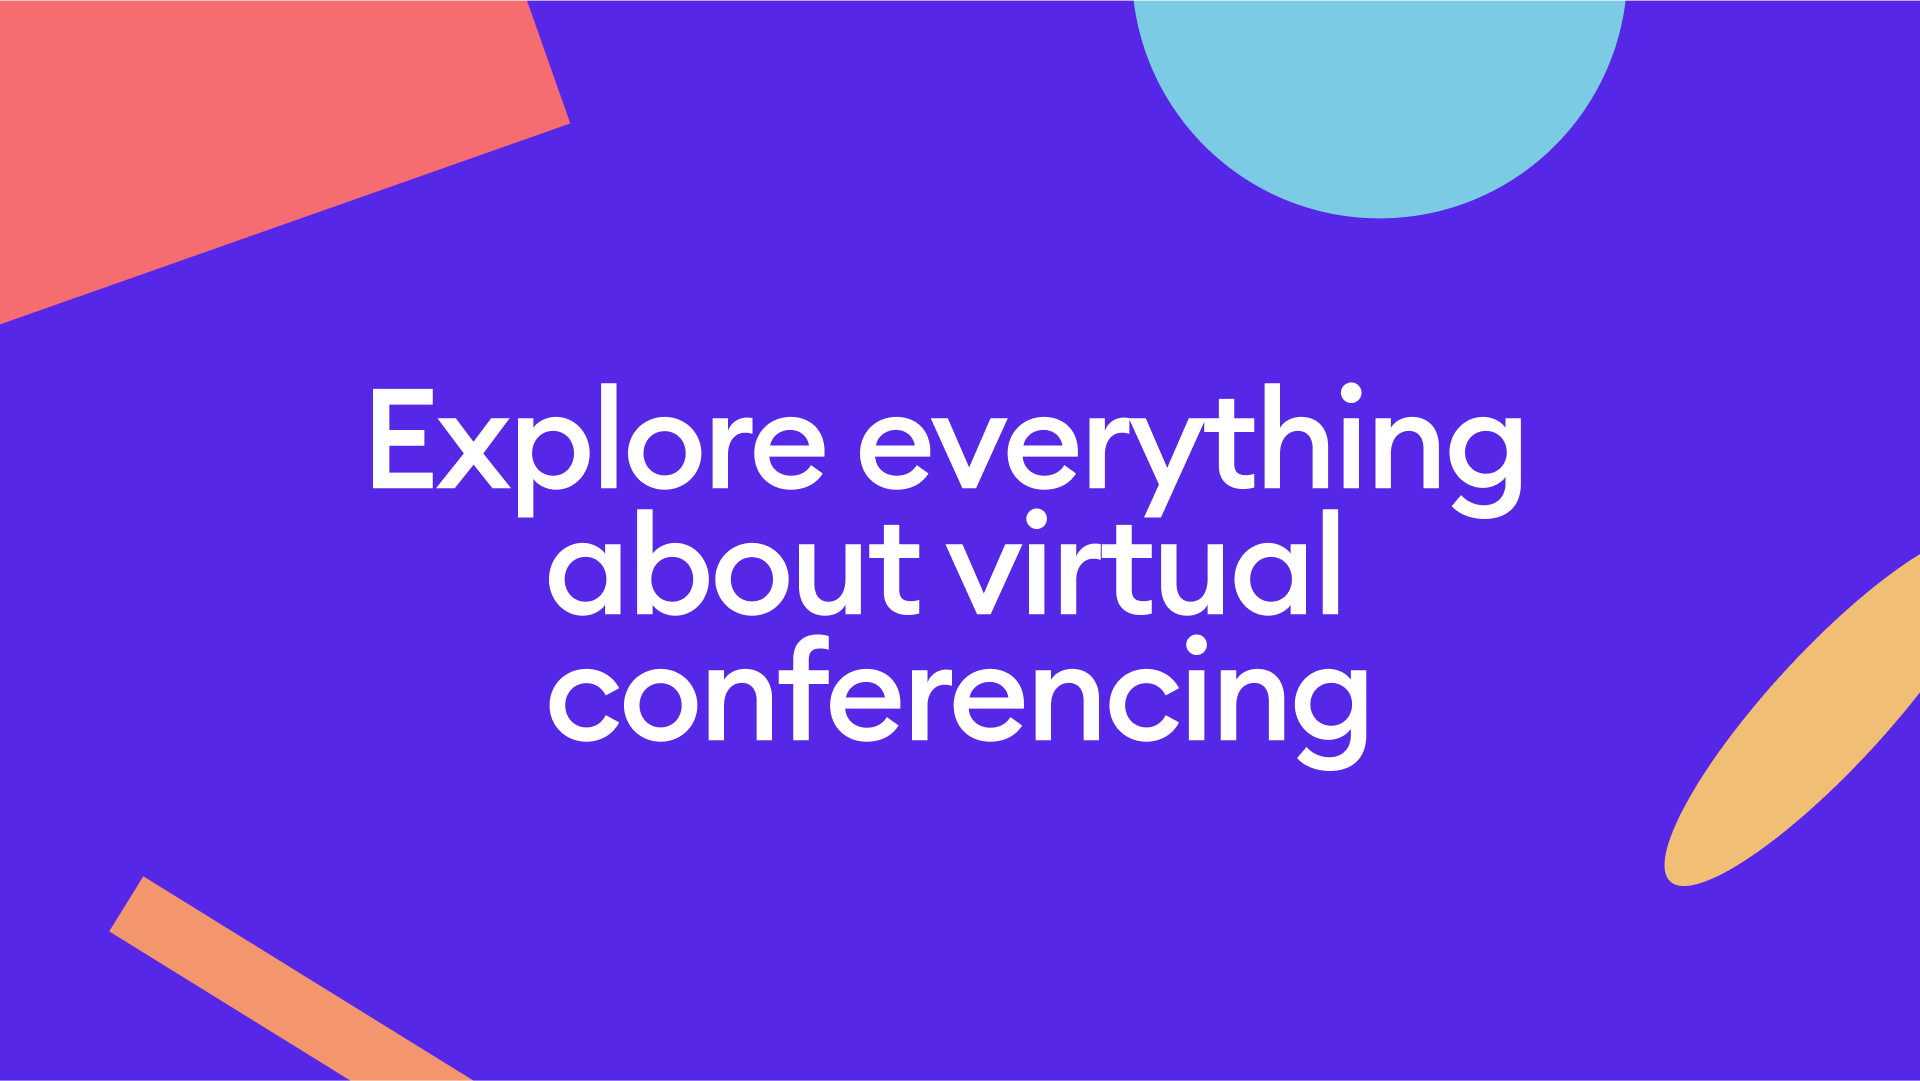 Let's explore everything about a successful virtual conferencing